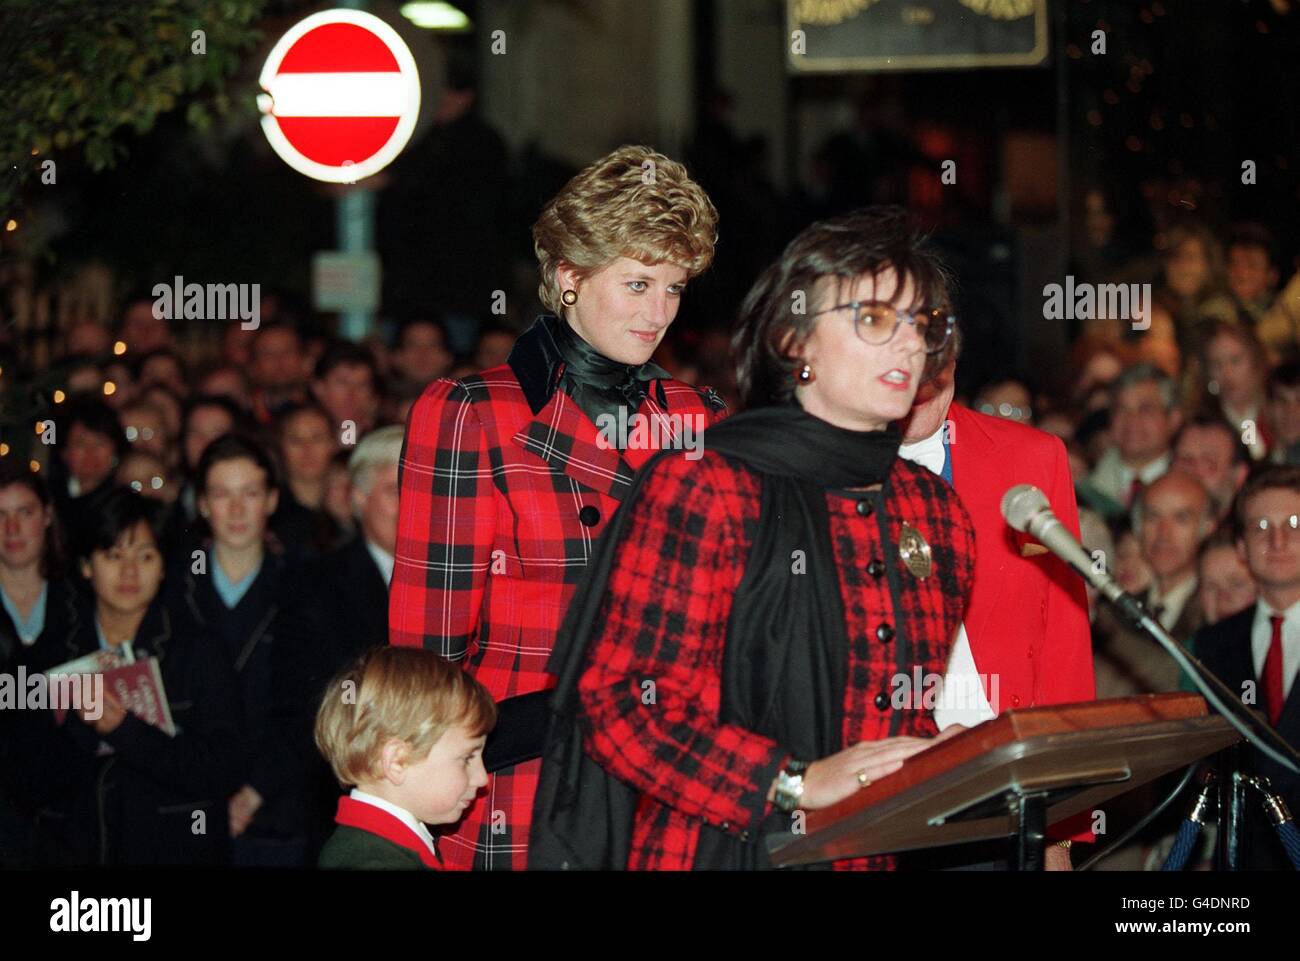 PA NEWS PHOTO 17/11/93 THE PRINCESS OF WALES LISTENS TO ROSA MONCKTON AS SHE GIVES HER SPEECH BEFORE SWITCHING ON THE CHRISTMAS LIGHTS IN LONDON'S BOND STREET. *30/11/04: John Monckton a director of Legal and General died and his wife was left seriously injured after two knife-wielding intruders burst into their Chelsea home. Mr Monckton was a cousin of Rosa Monckton, a close friend of Princess Diana, who is married to Dominic Lawson, the editor of the Sunday Telegraph. Stock Photo